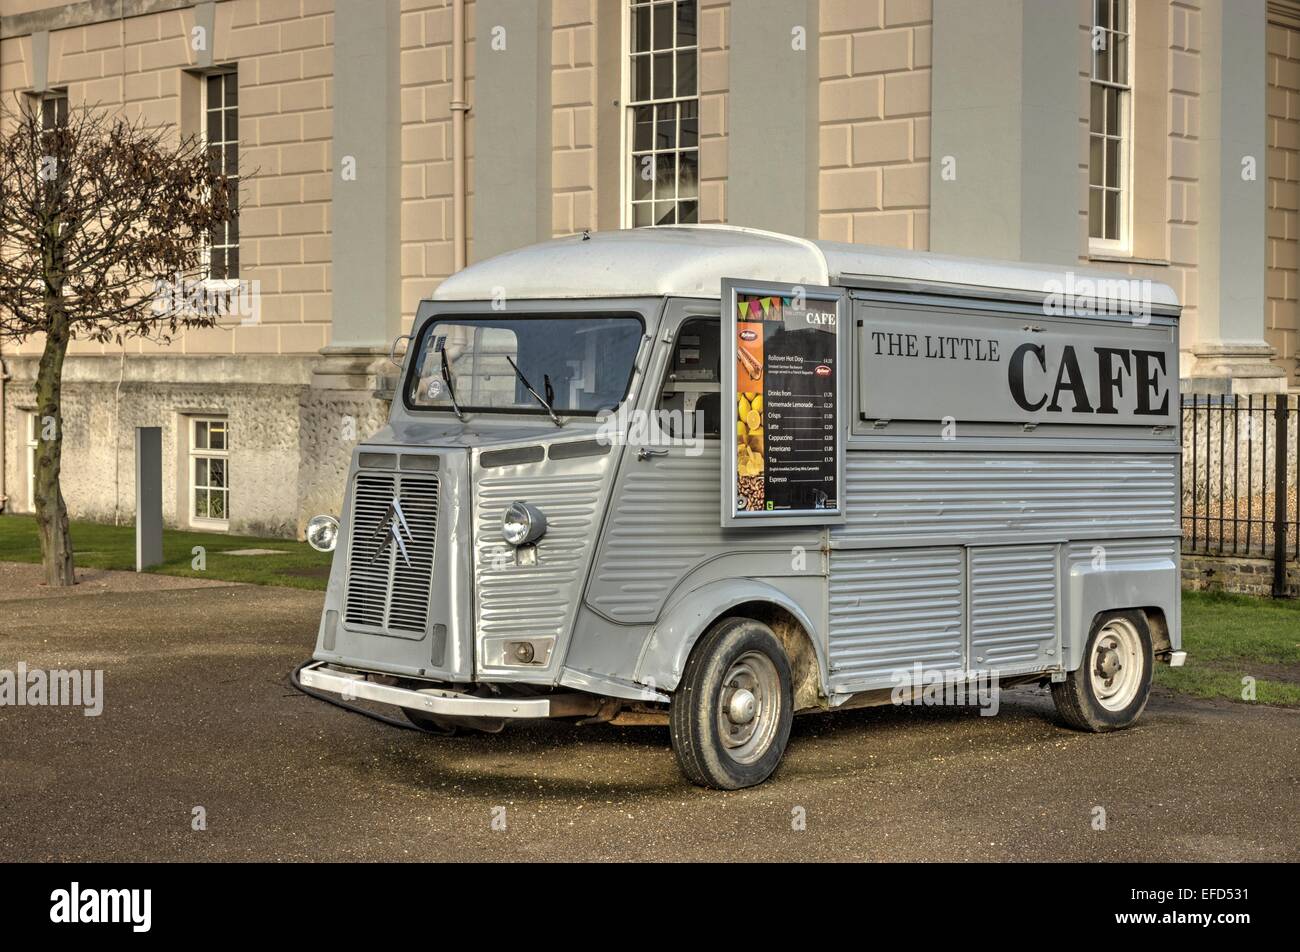 Cafe/van  mobile cafe  Greenwich Stock Photo